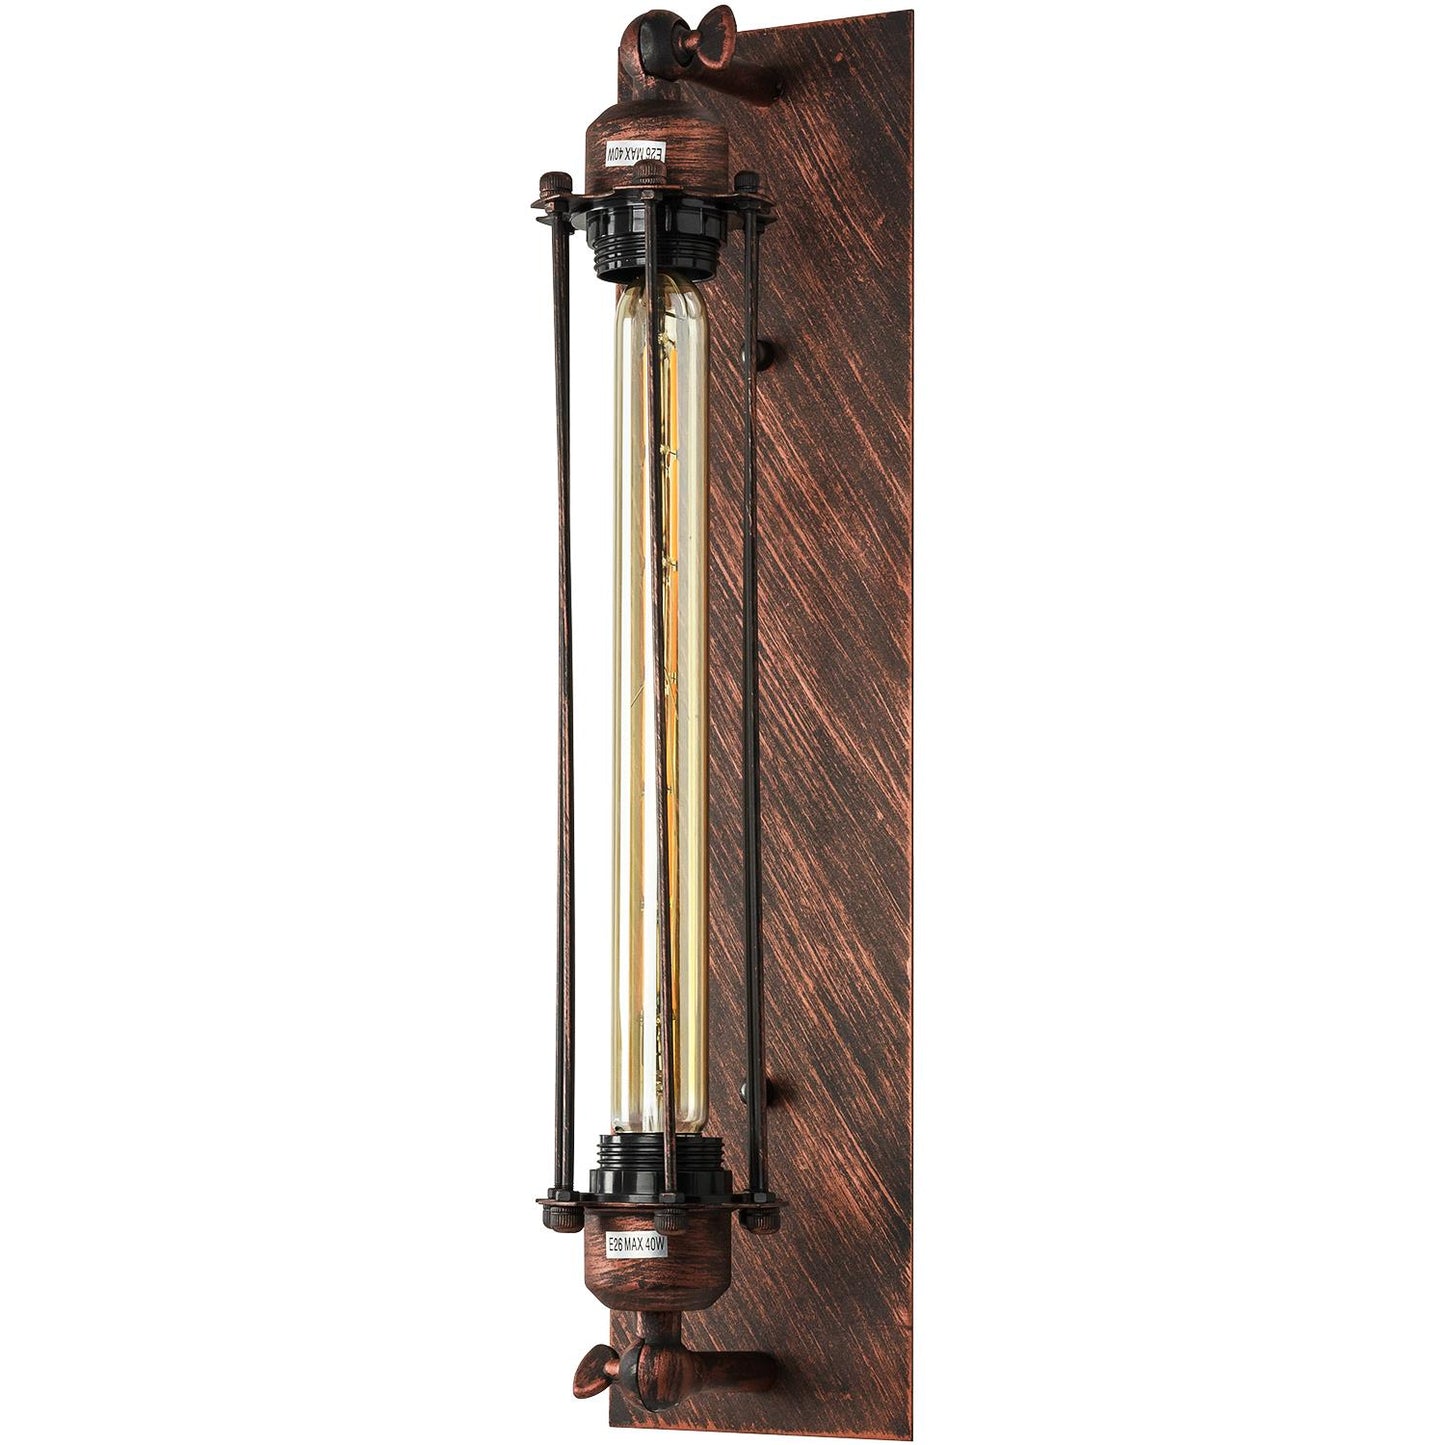 Sunlite Plate Wall Sconce Vintage Antique Style Fixture, Iron Rust Finish